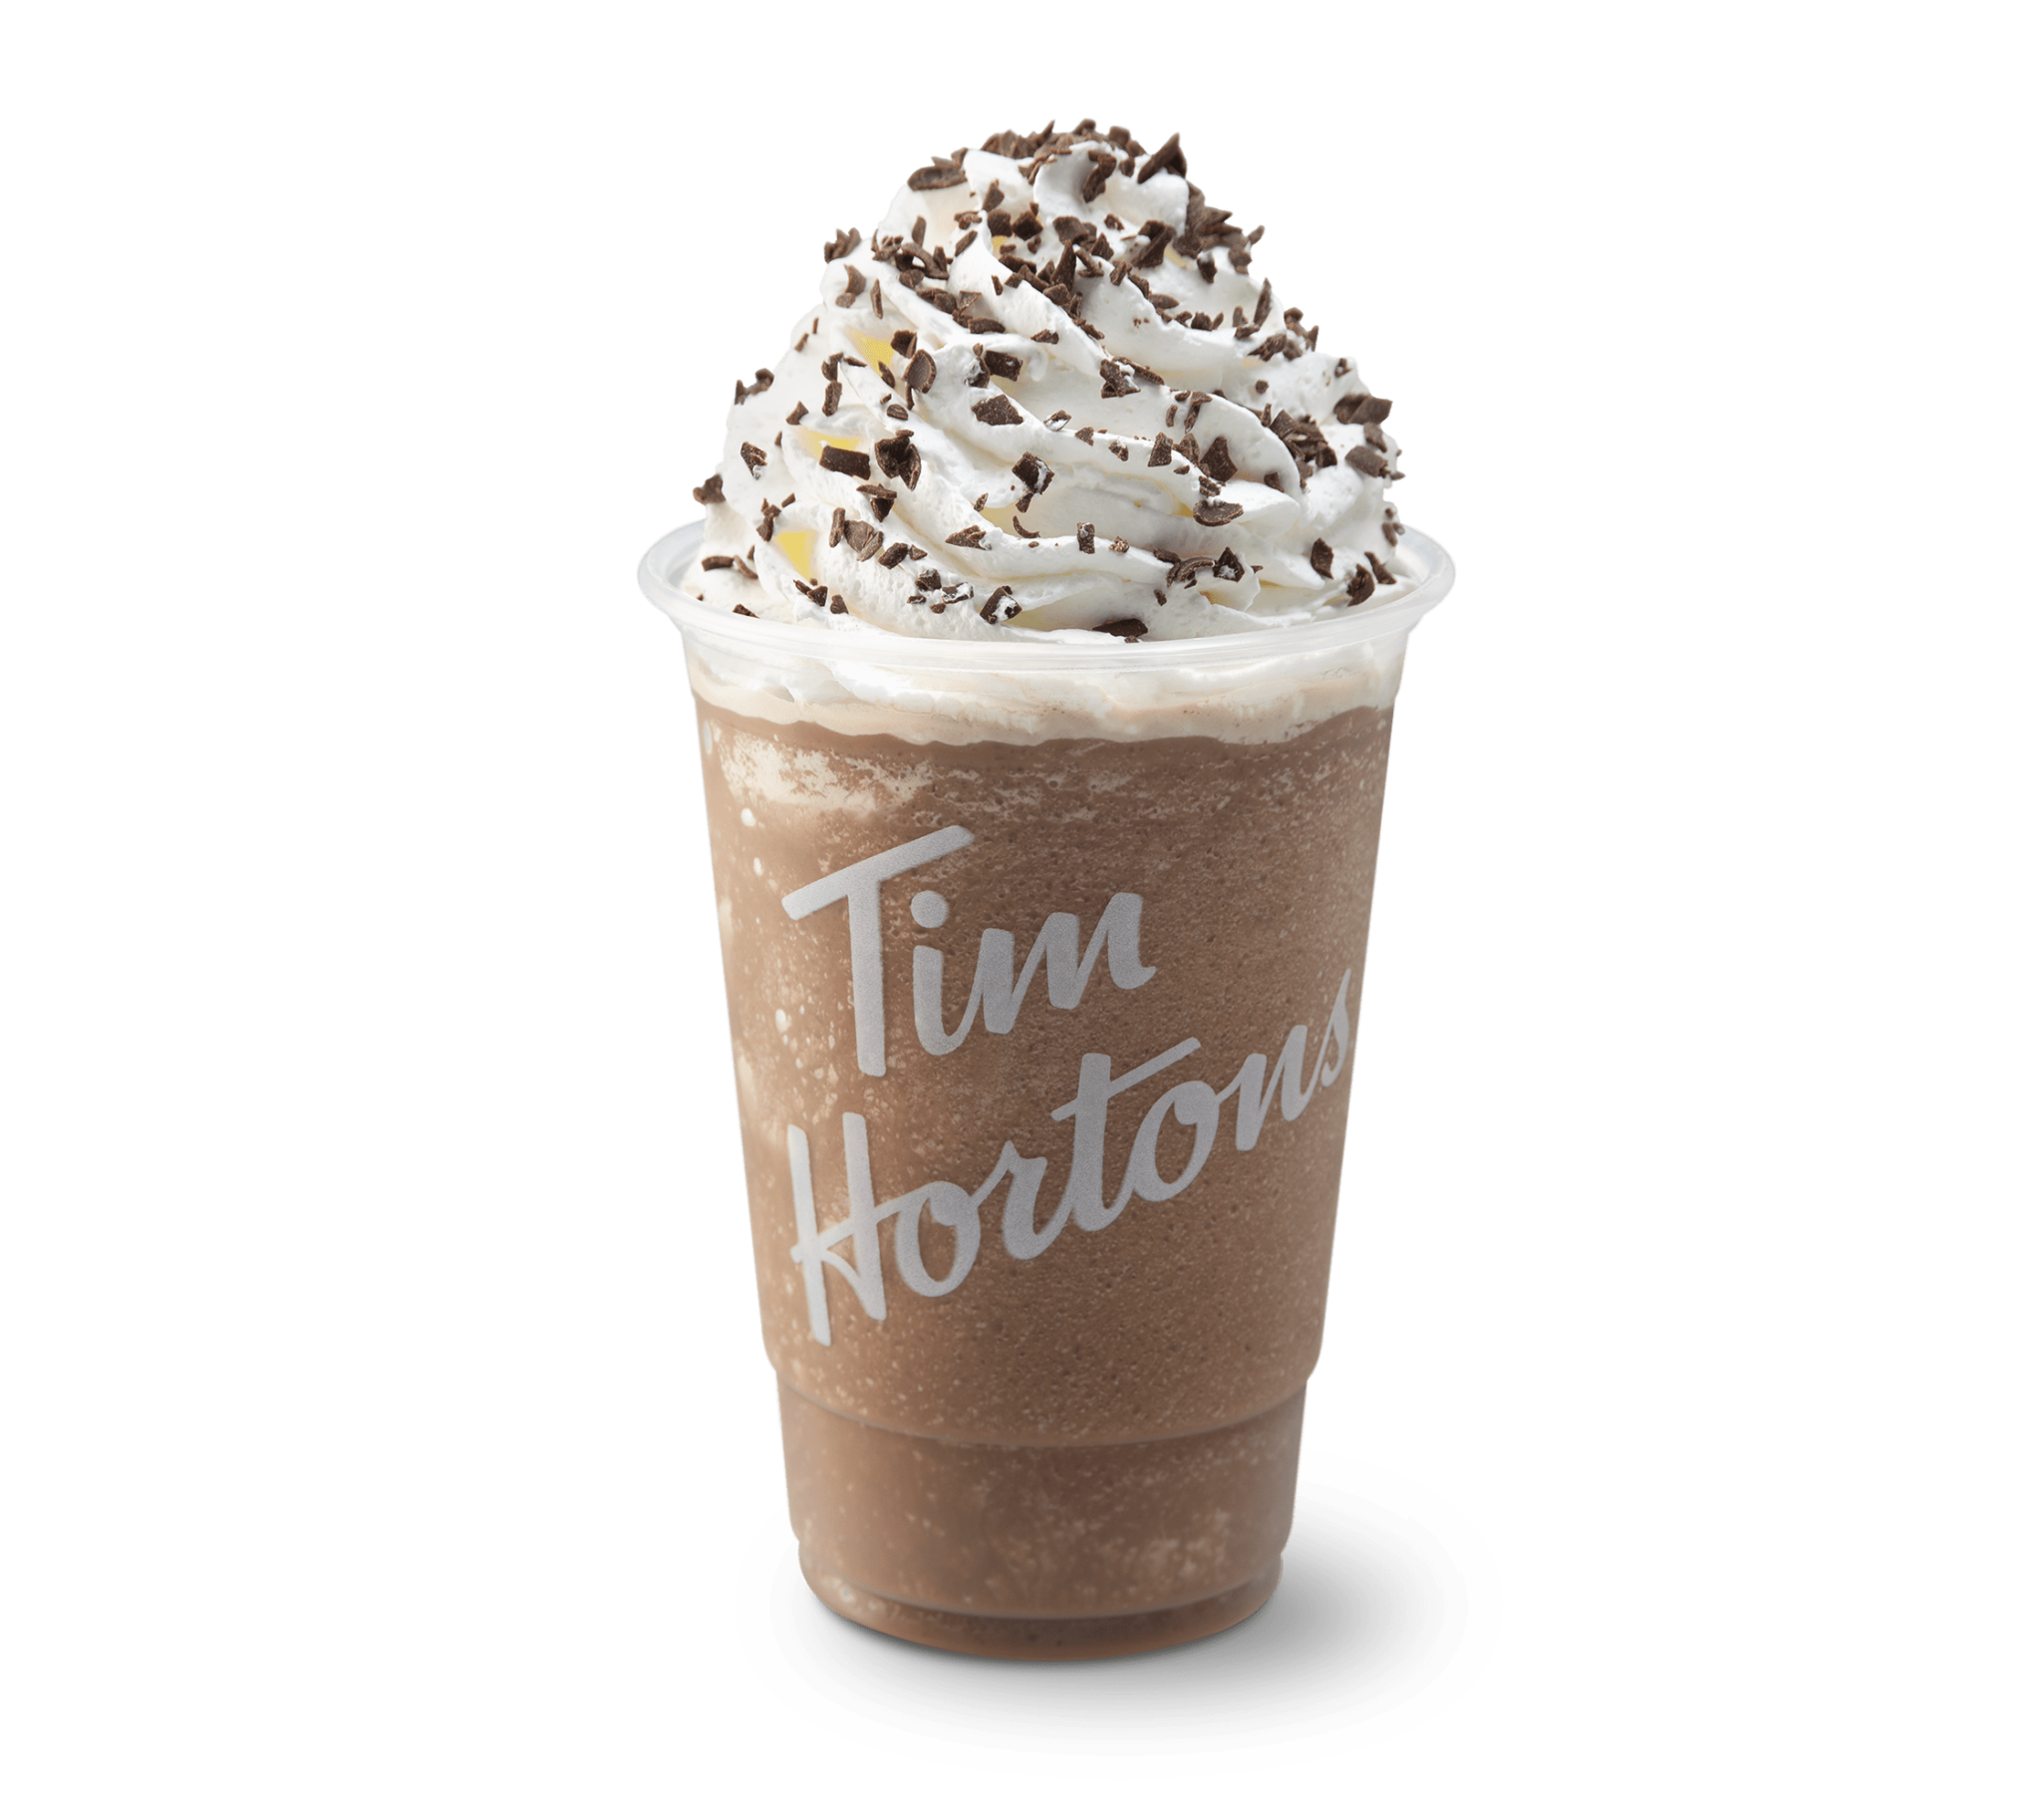 tim hortons iced capp Tim hortons canada day deals: buy one iced capp, get one free from july